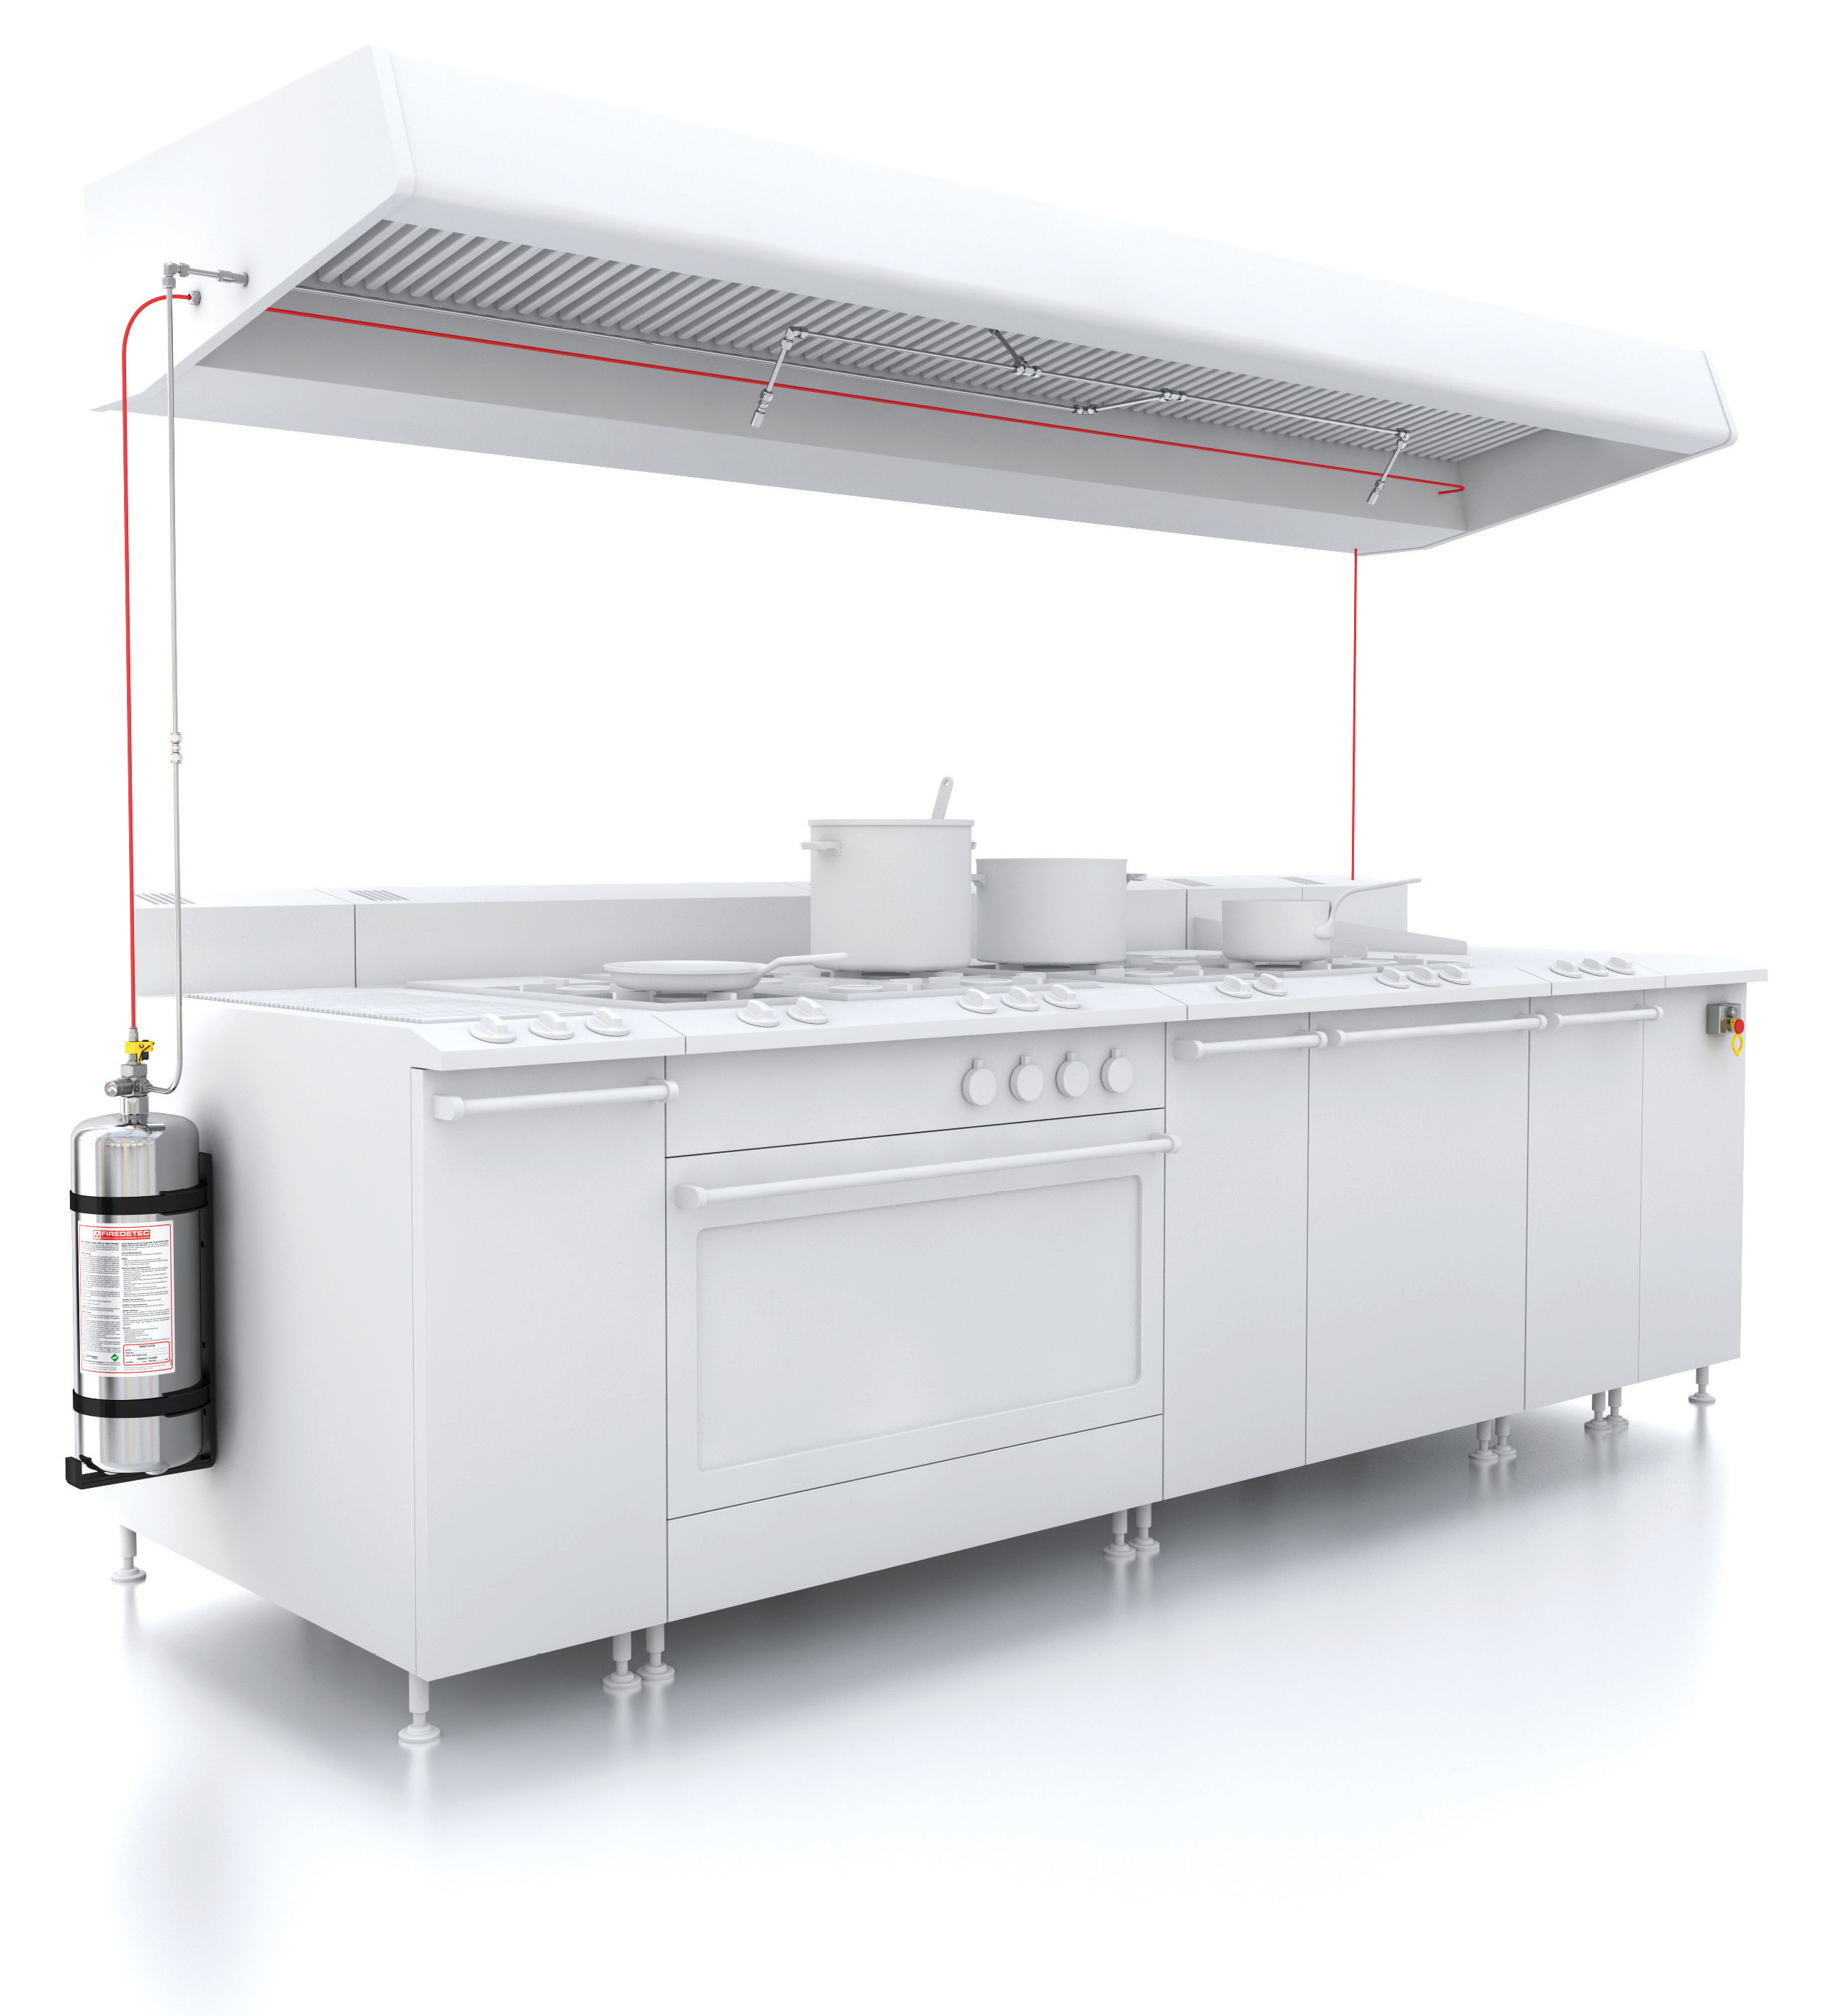 Economical fire protection for small to mid-sized commercial kitchens